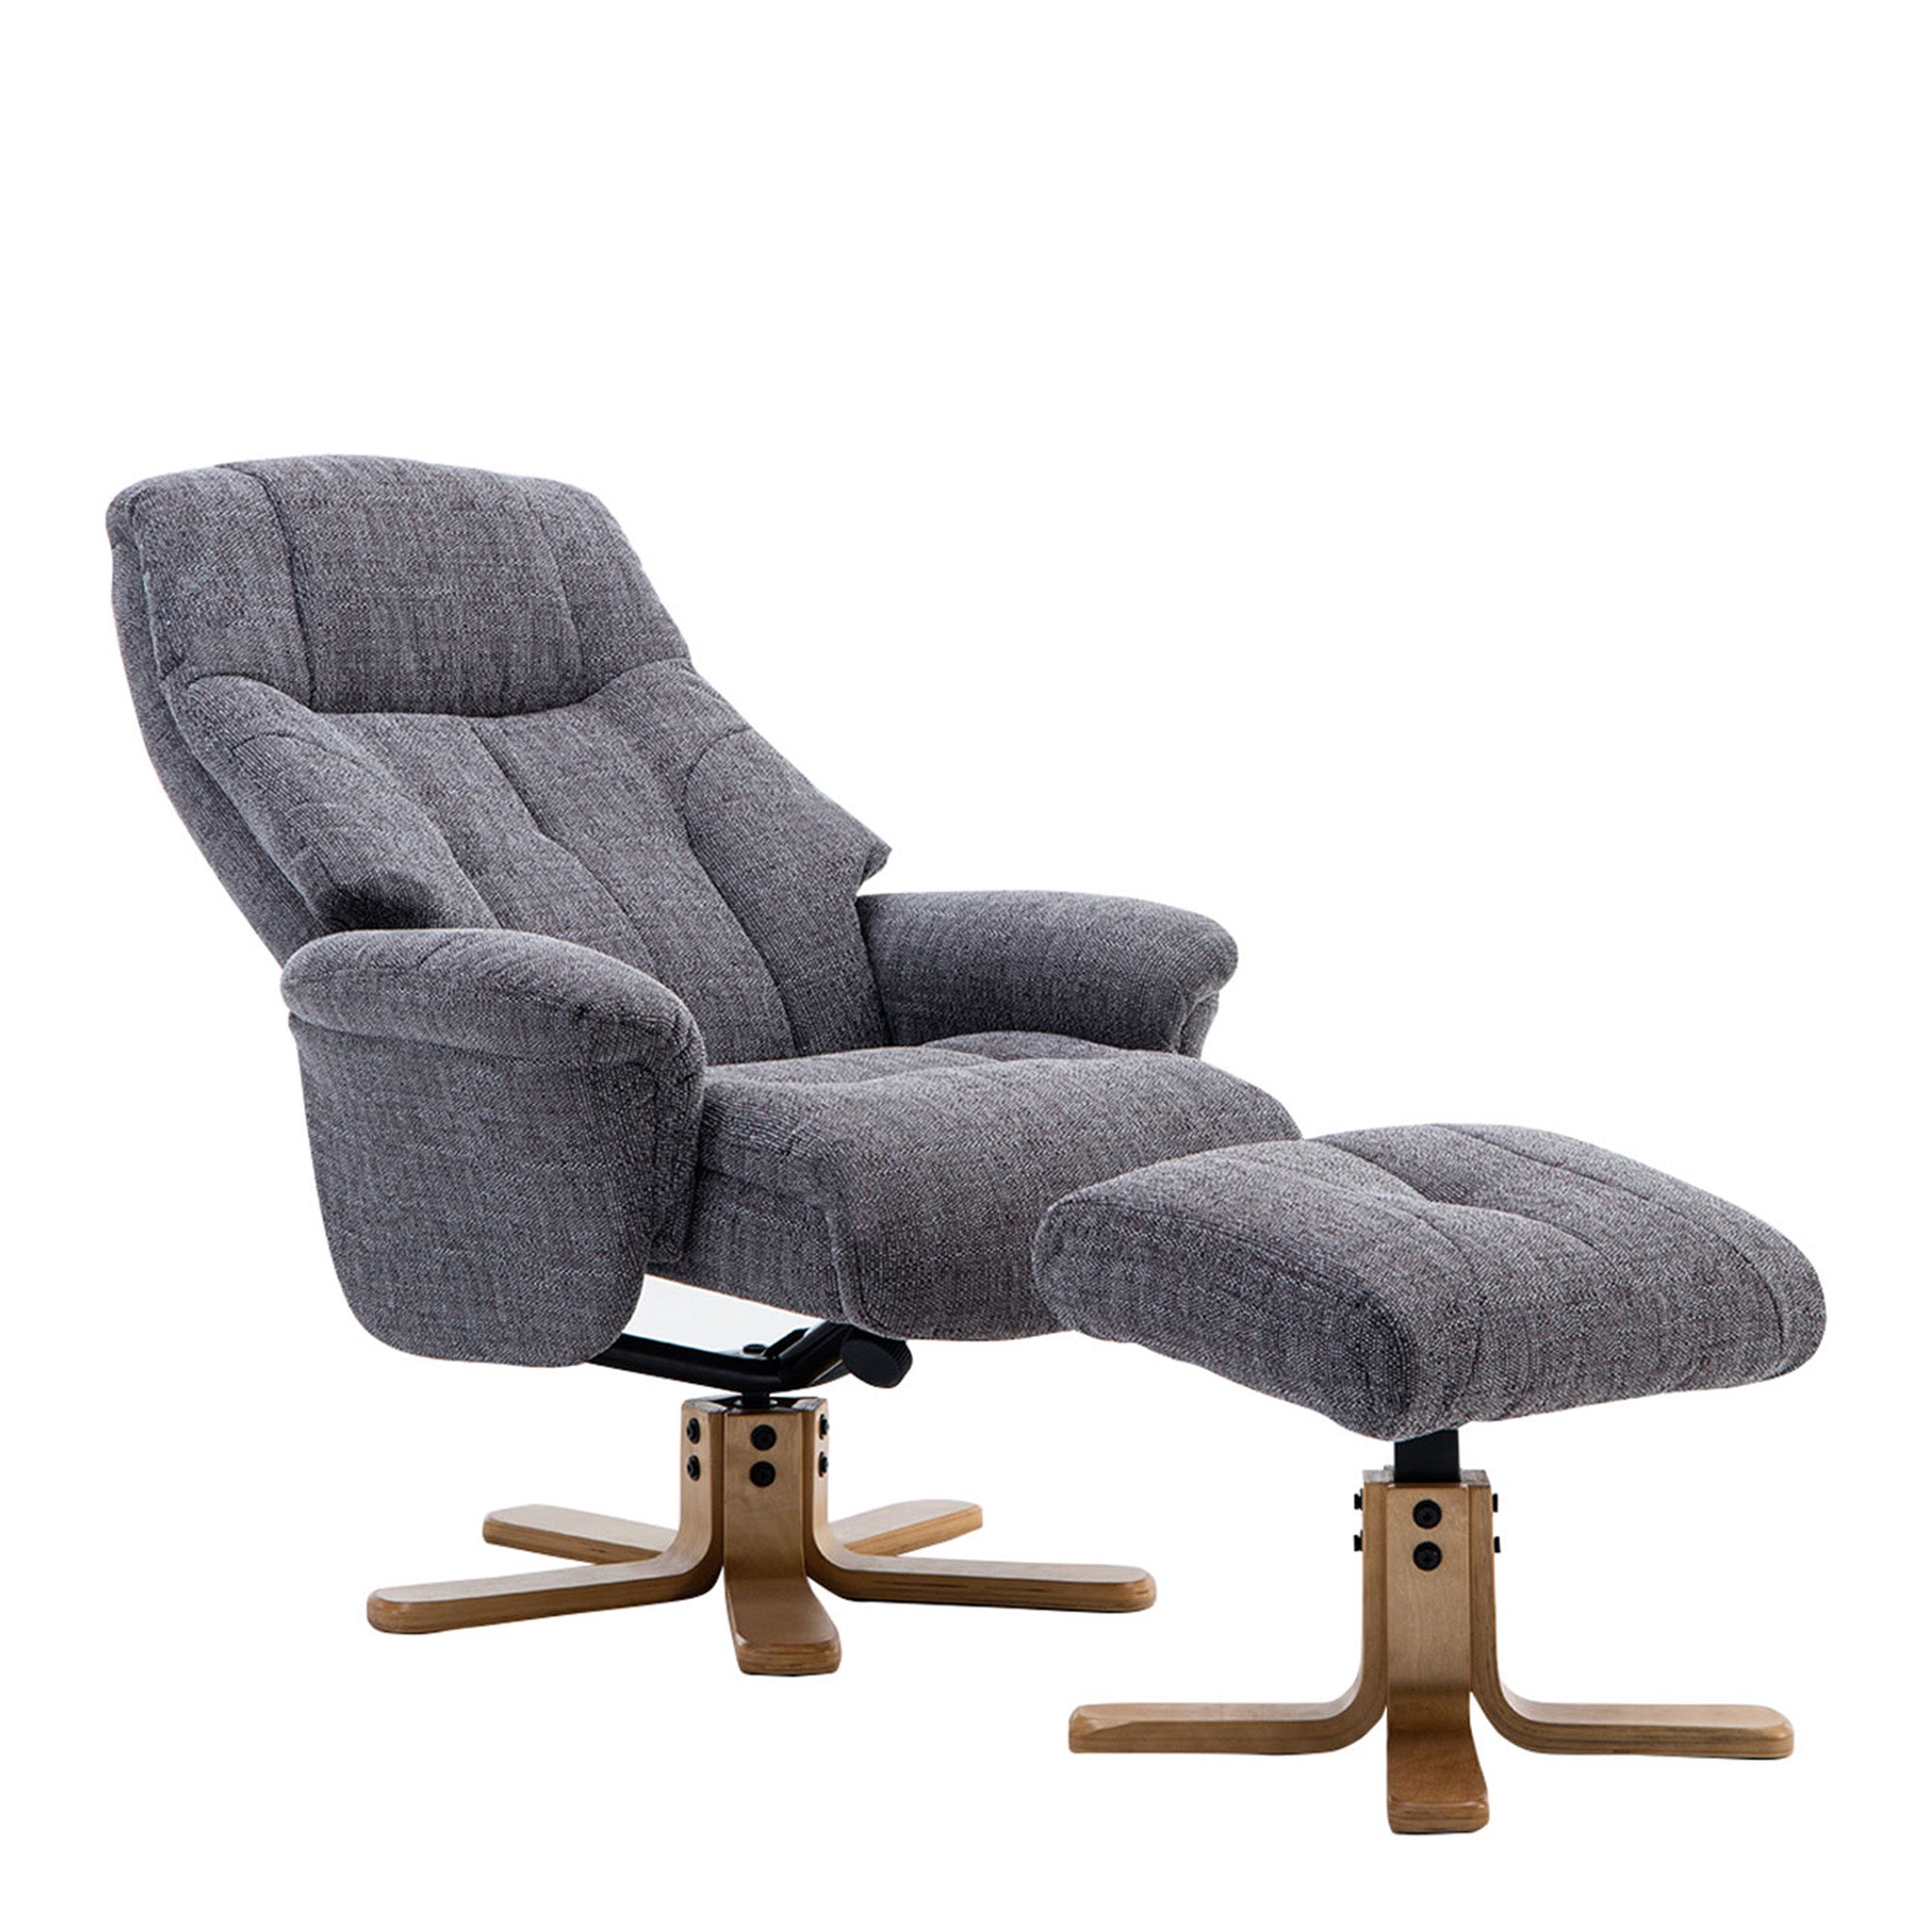 Swivel Chair And Stool In Lisbon Grey Fabric (Assembly Required)